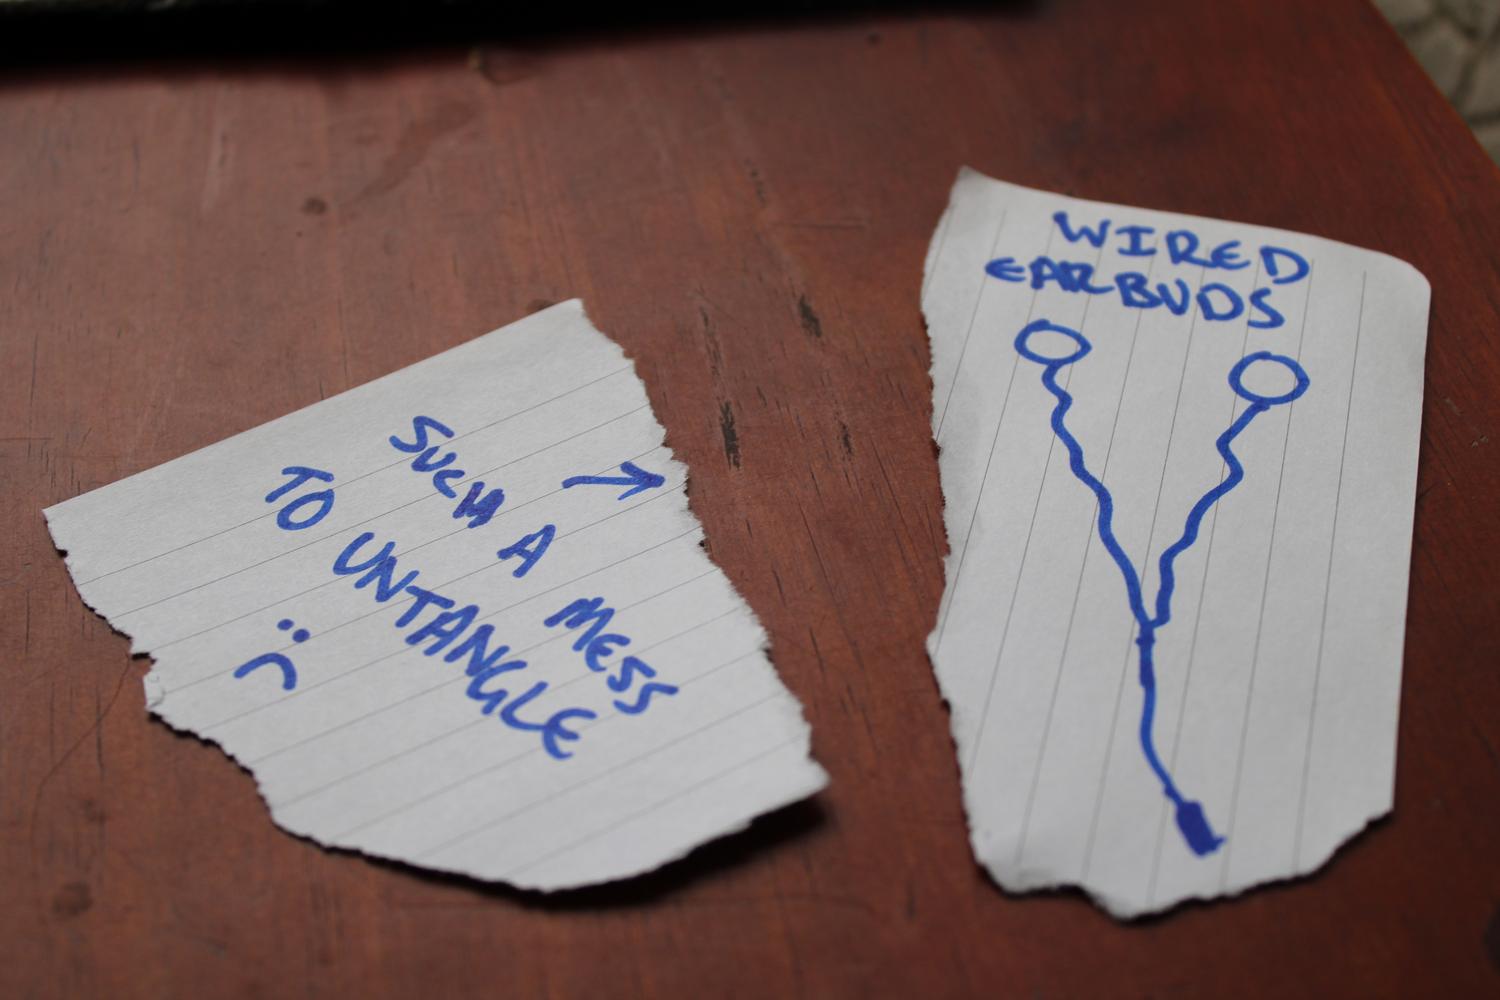 A close up photo of a table surface with two pieces of paper. One on the left says &ldquo;Such a mess to untangle&rdquo; with a sad face and an arrow pointing to the right. The piece of paper on the right is a ridiculously bad drawing of wired earbuds with text at the top that reads &ldquo;Wired earbuds&rdquo;. I no longer had the them in my position so this is supposed to be a placeholder for the real thing.